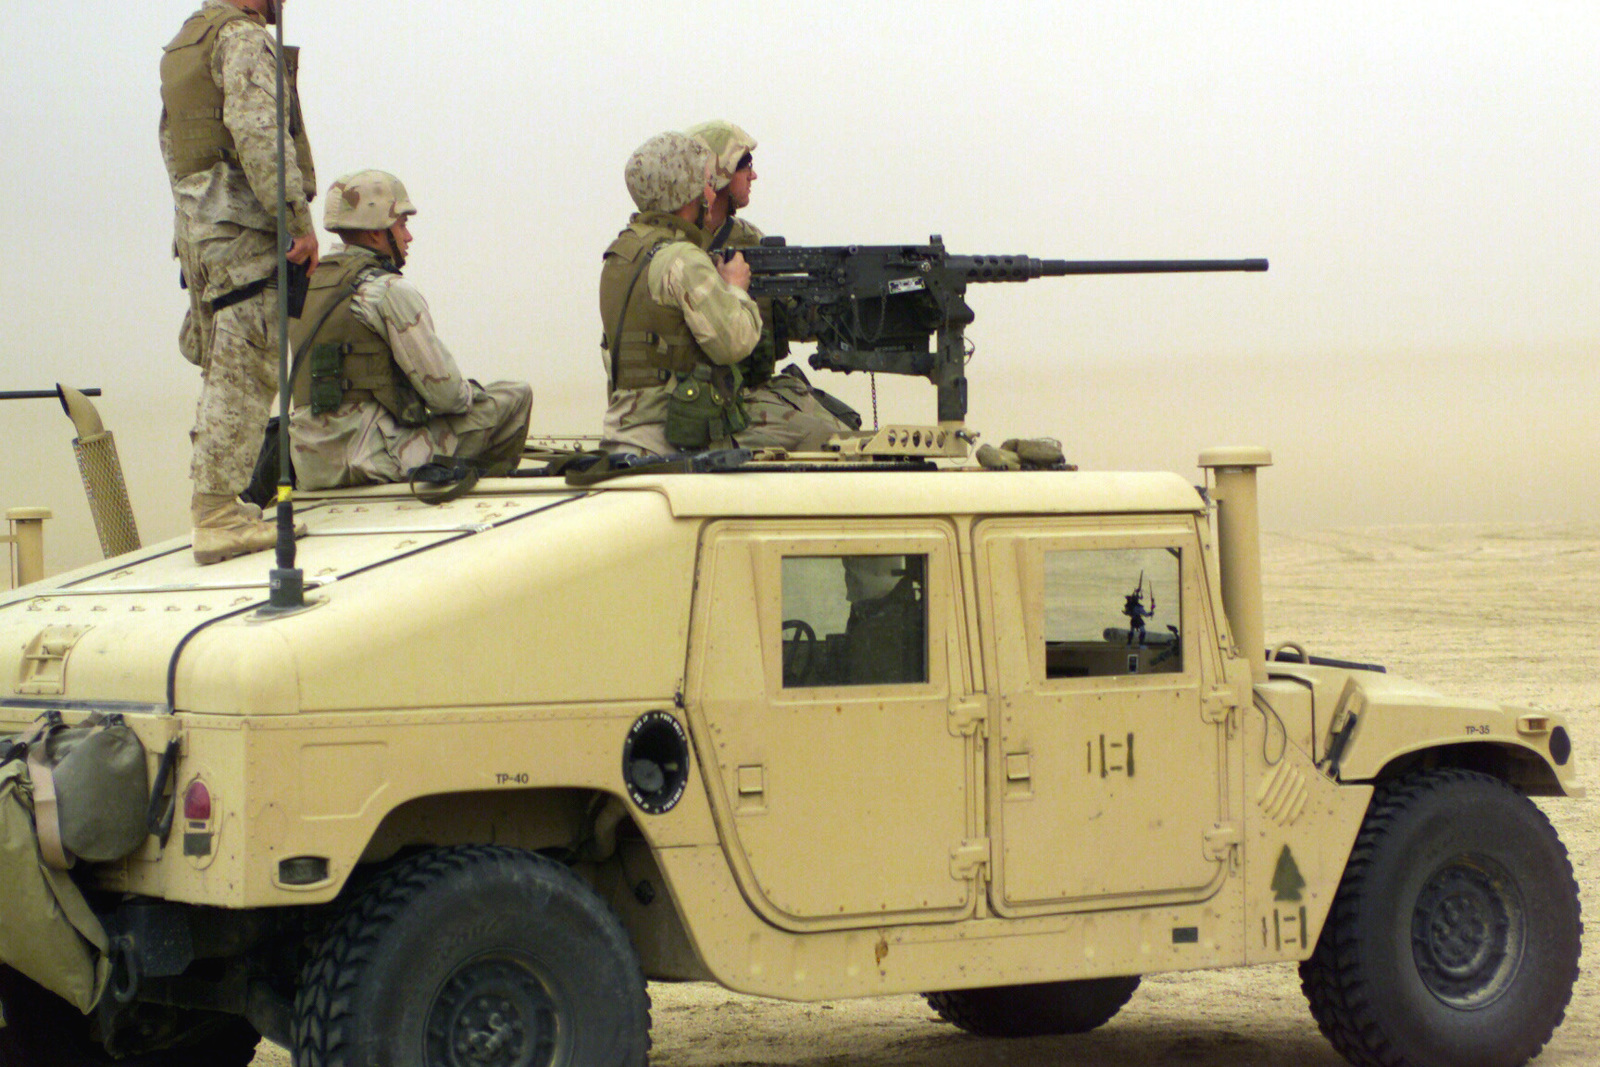 From The M1043 High Mobility Multipurpose Wheeled Vehicle